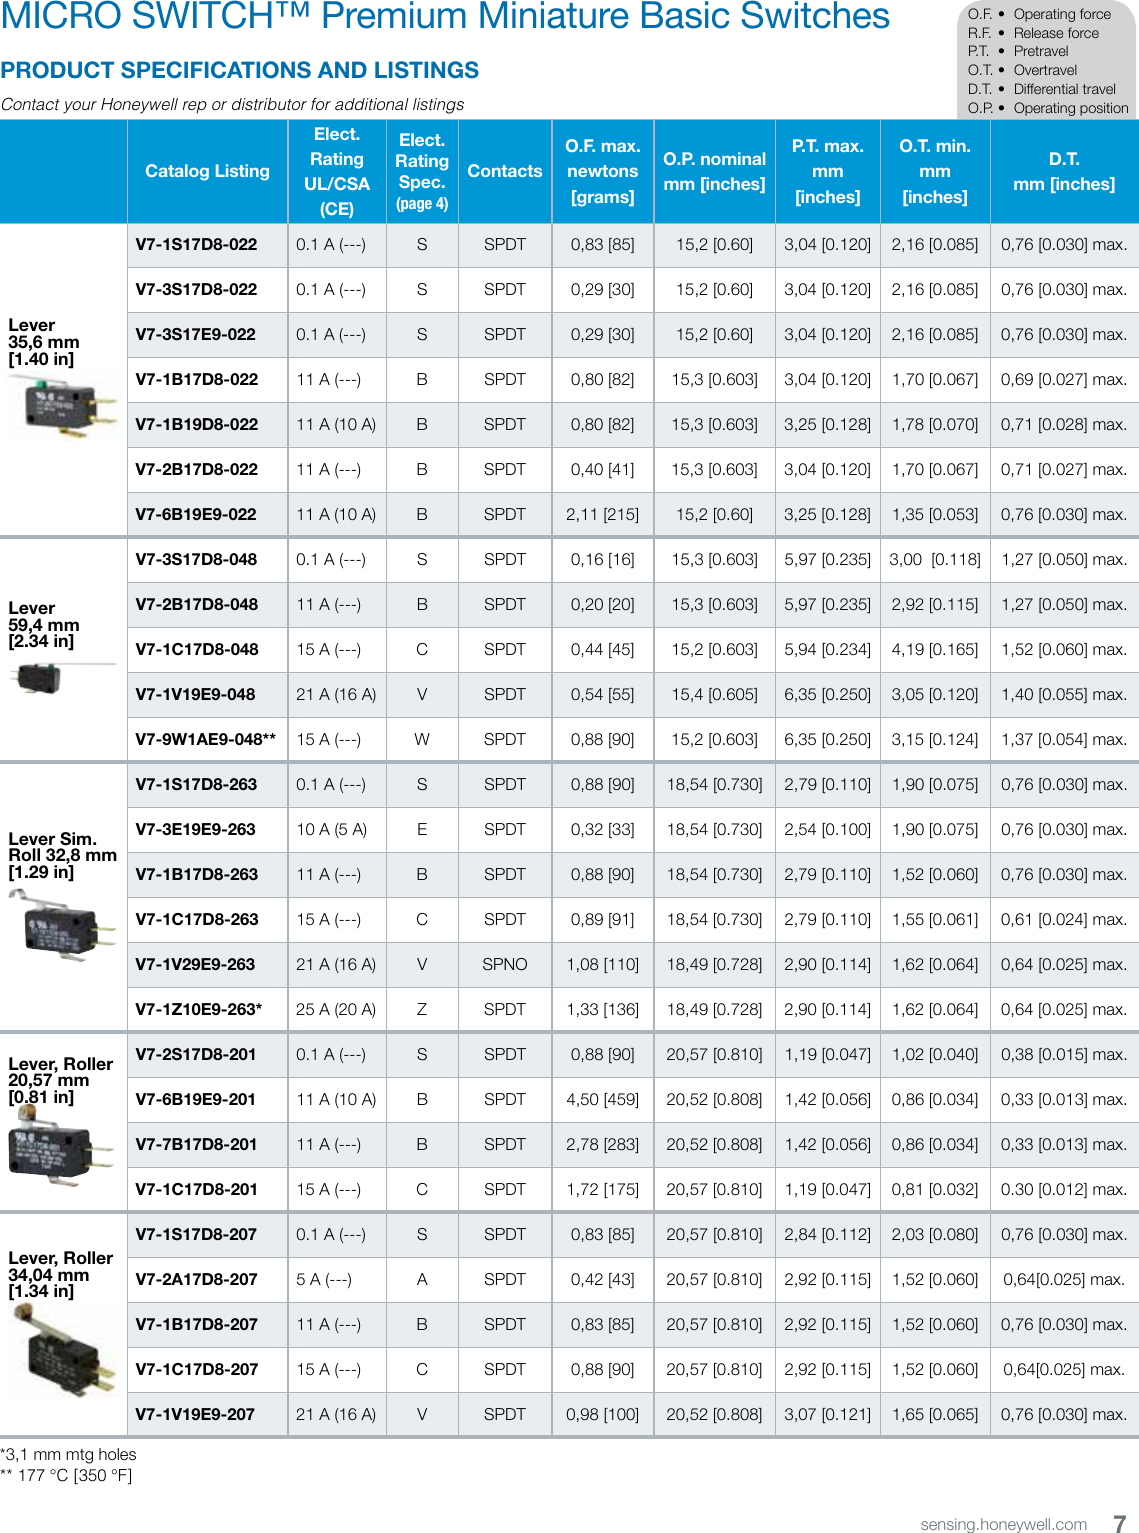 Page 7 of 11 - MICRO SWITCH™ V7 Premium Miniature Basic Switches  310427-Catalog